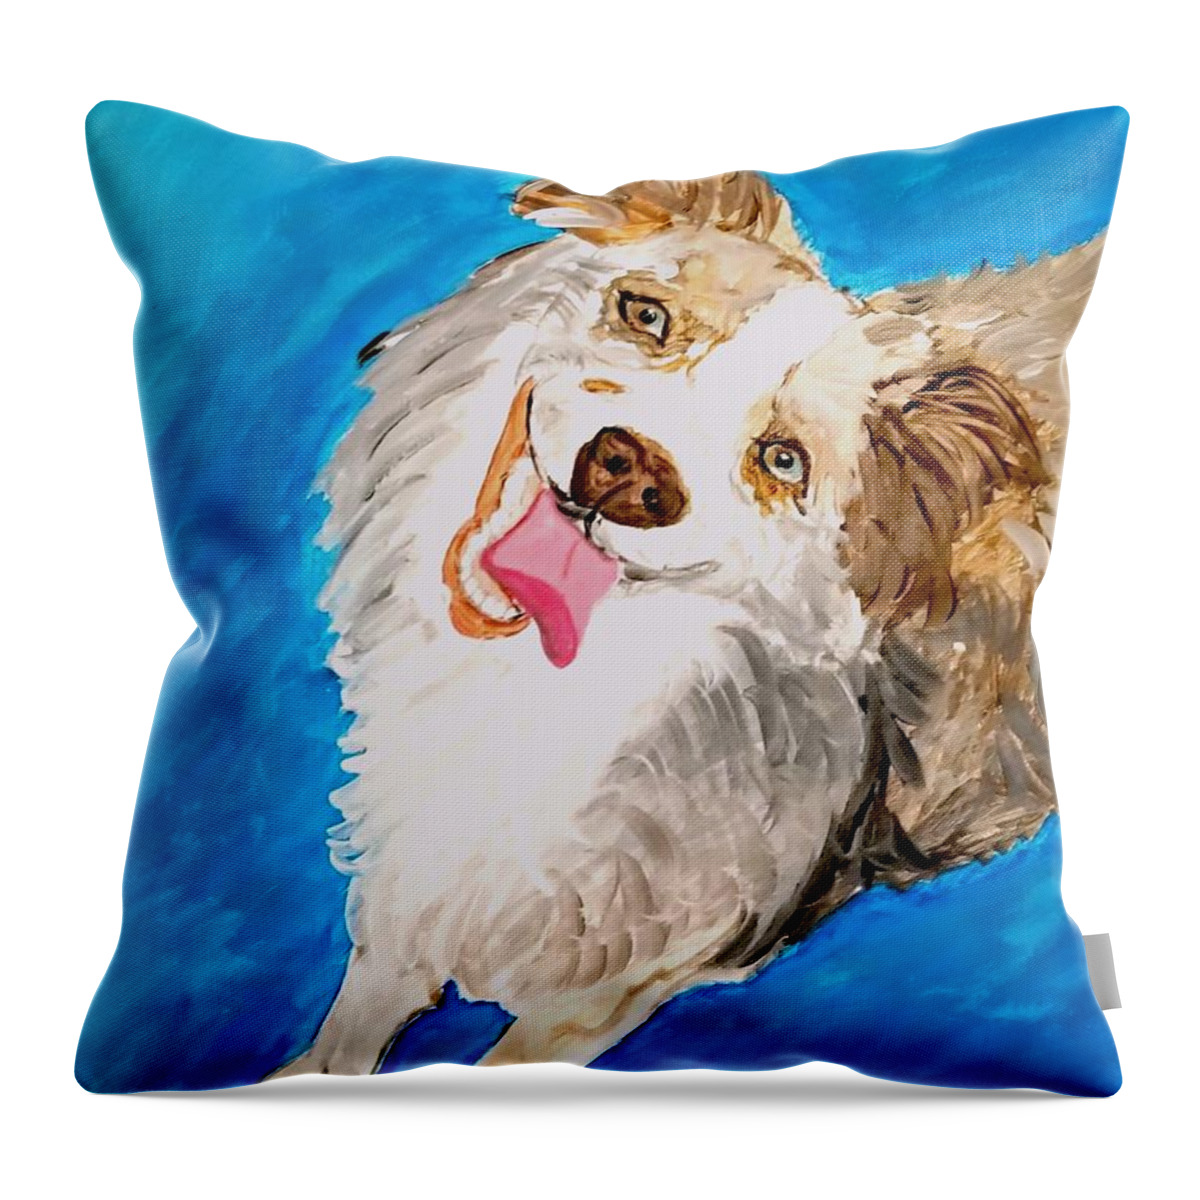 Date With Paint Throw Pillow featuring the painting DWP 12052020b by Ania M Milo